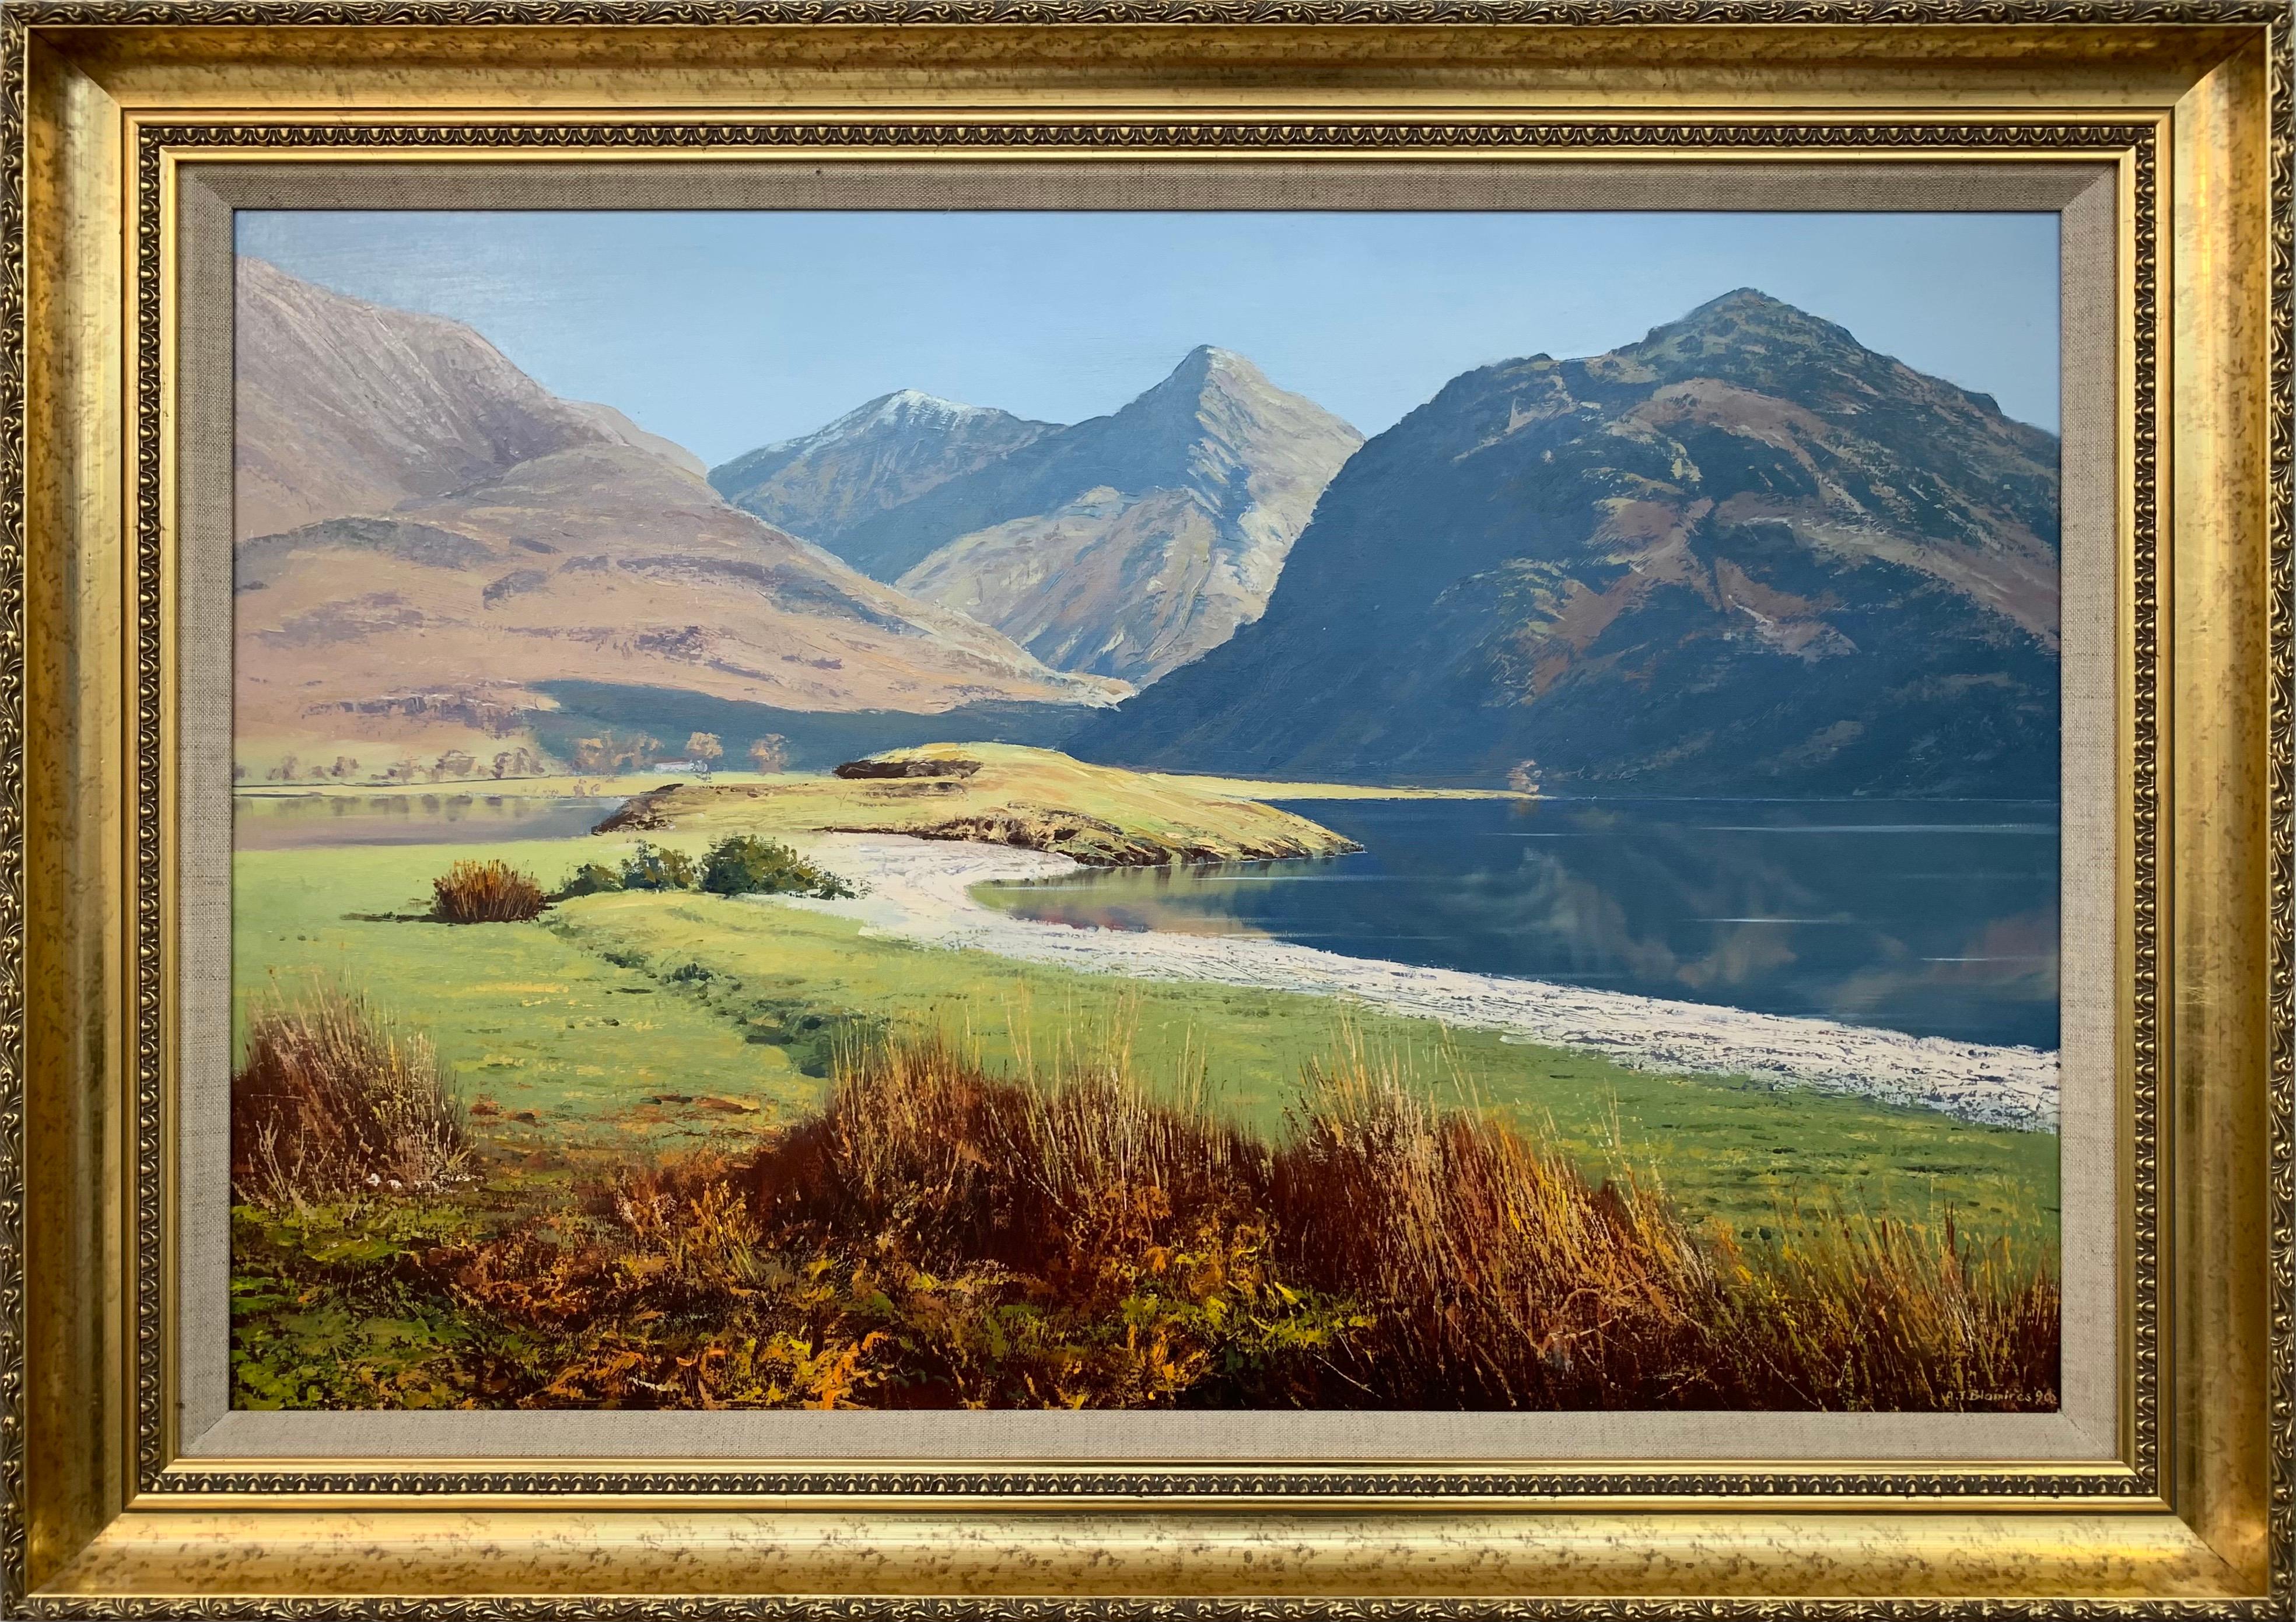 Arthur Terry Blamires Landscape Painting - Crummock Water in the English Lake District by Modern British Landscape Artist